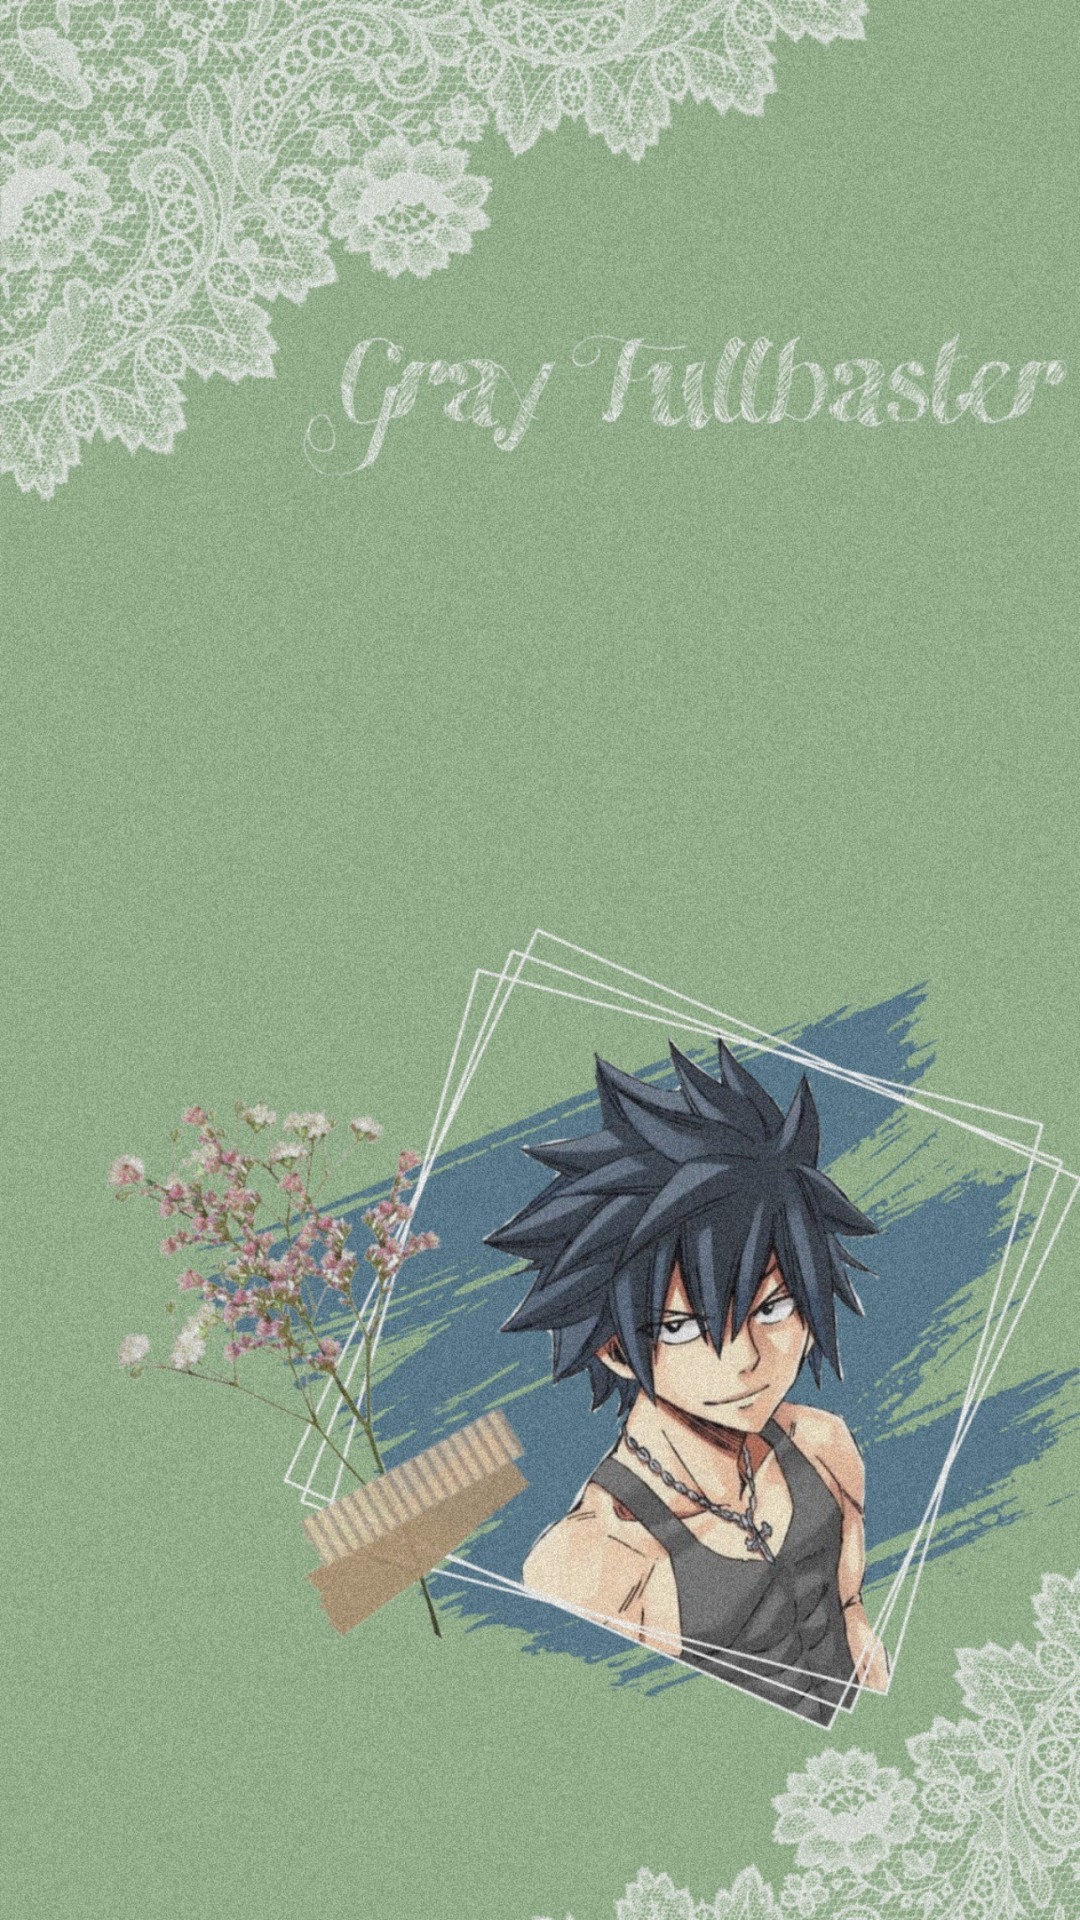 100+] Fairy Tail Aesthetic Wallpapers